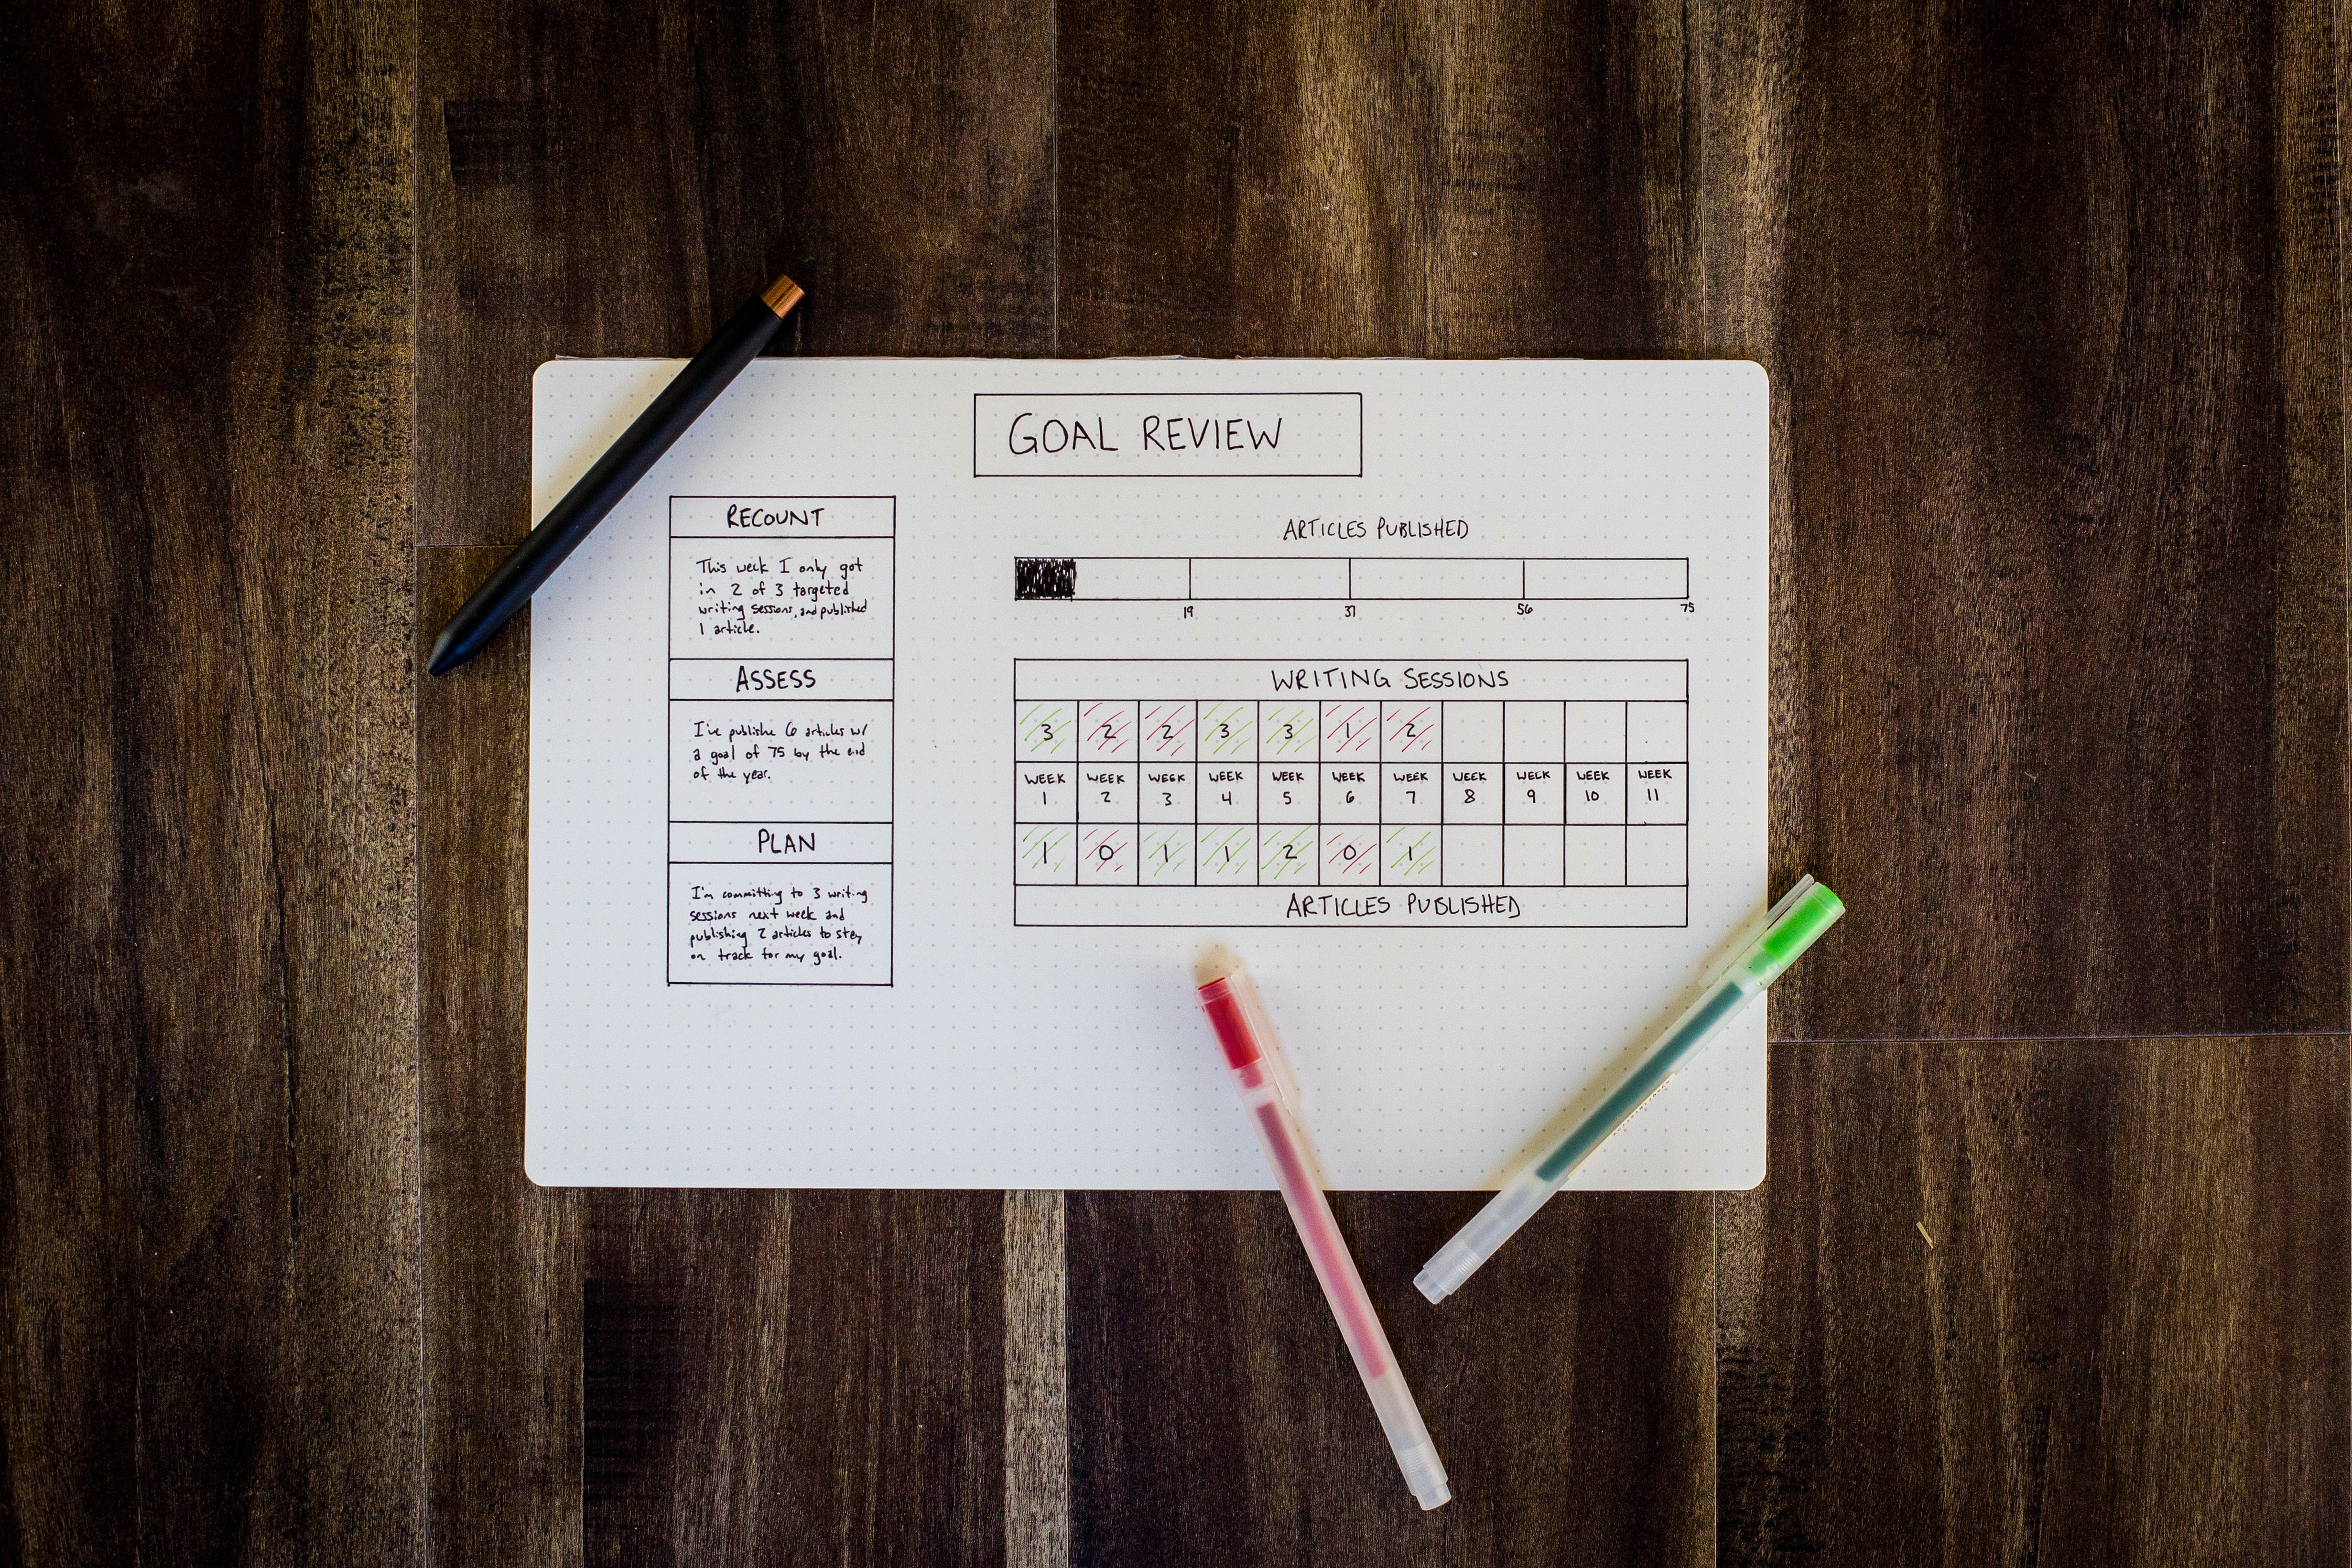 Goal tracking sheet for new year's resolutions.